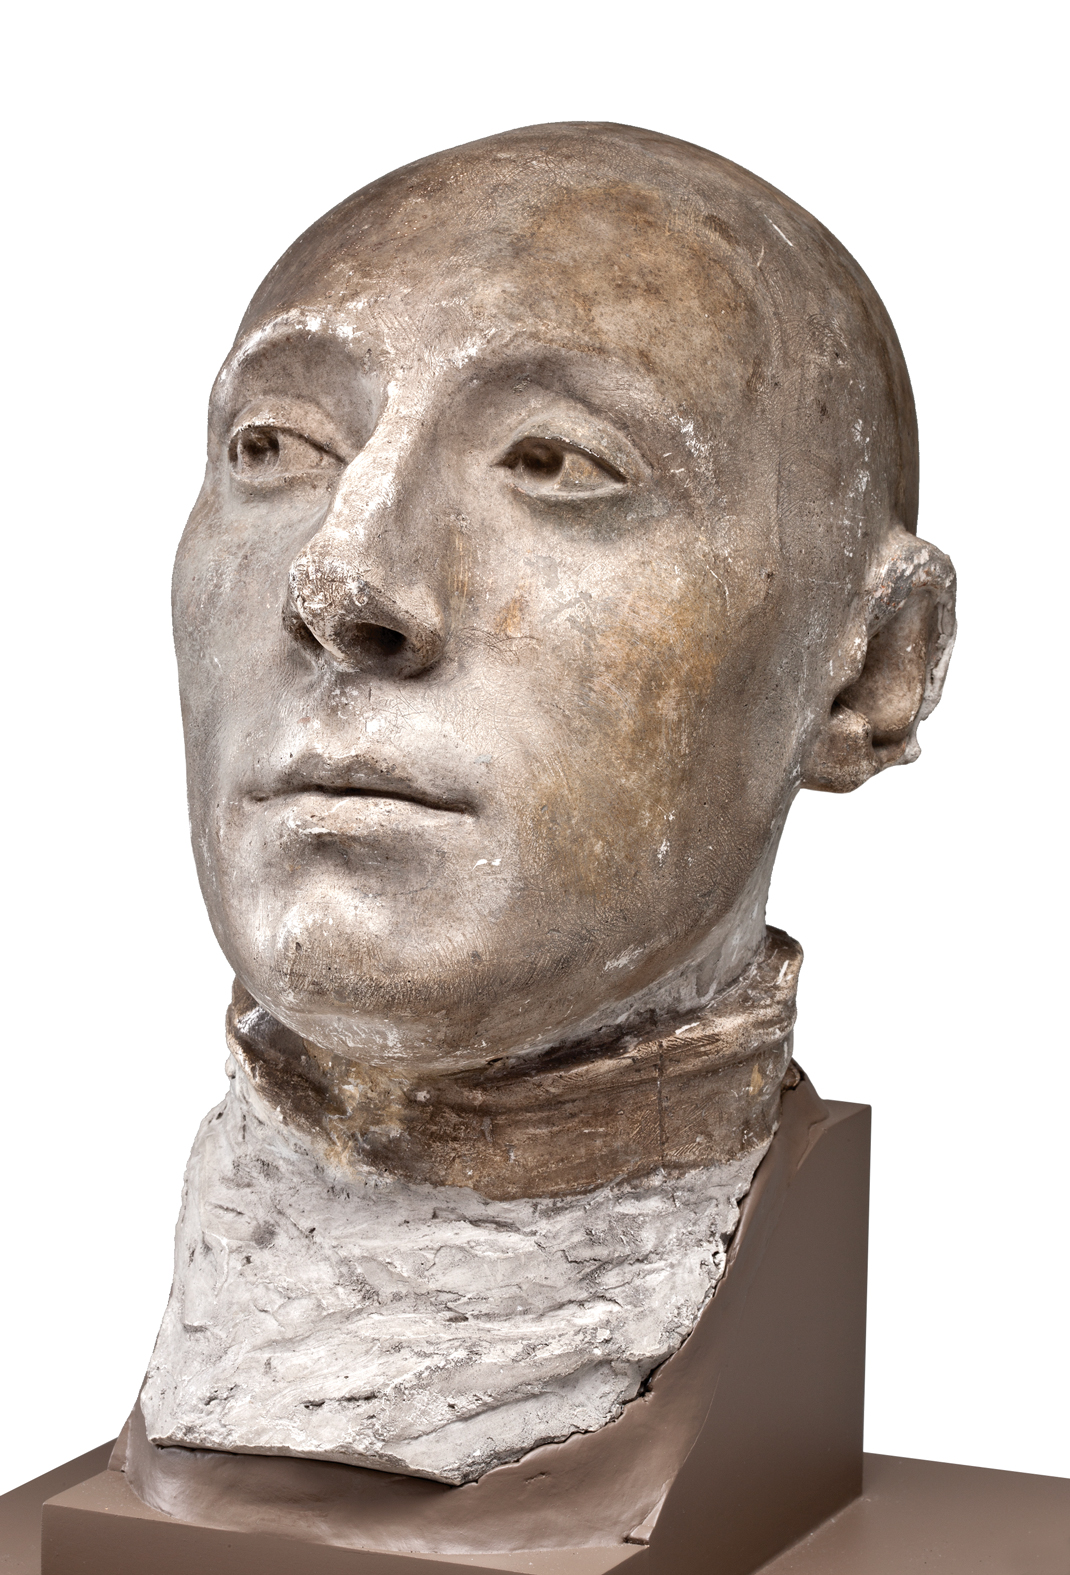 A historic plaster mask from 1785